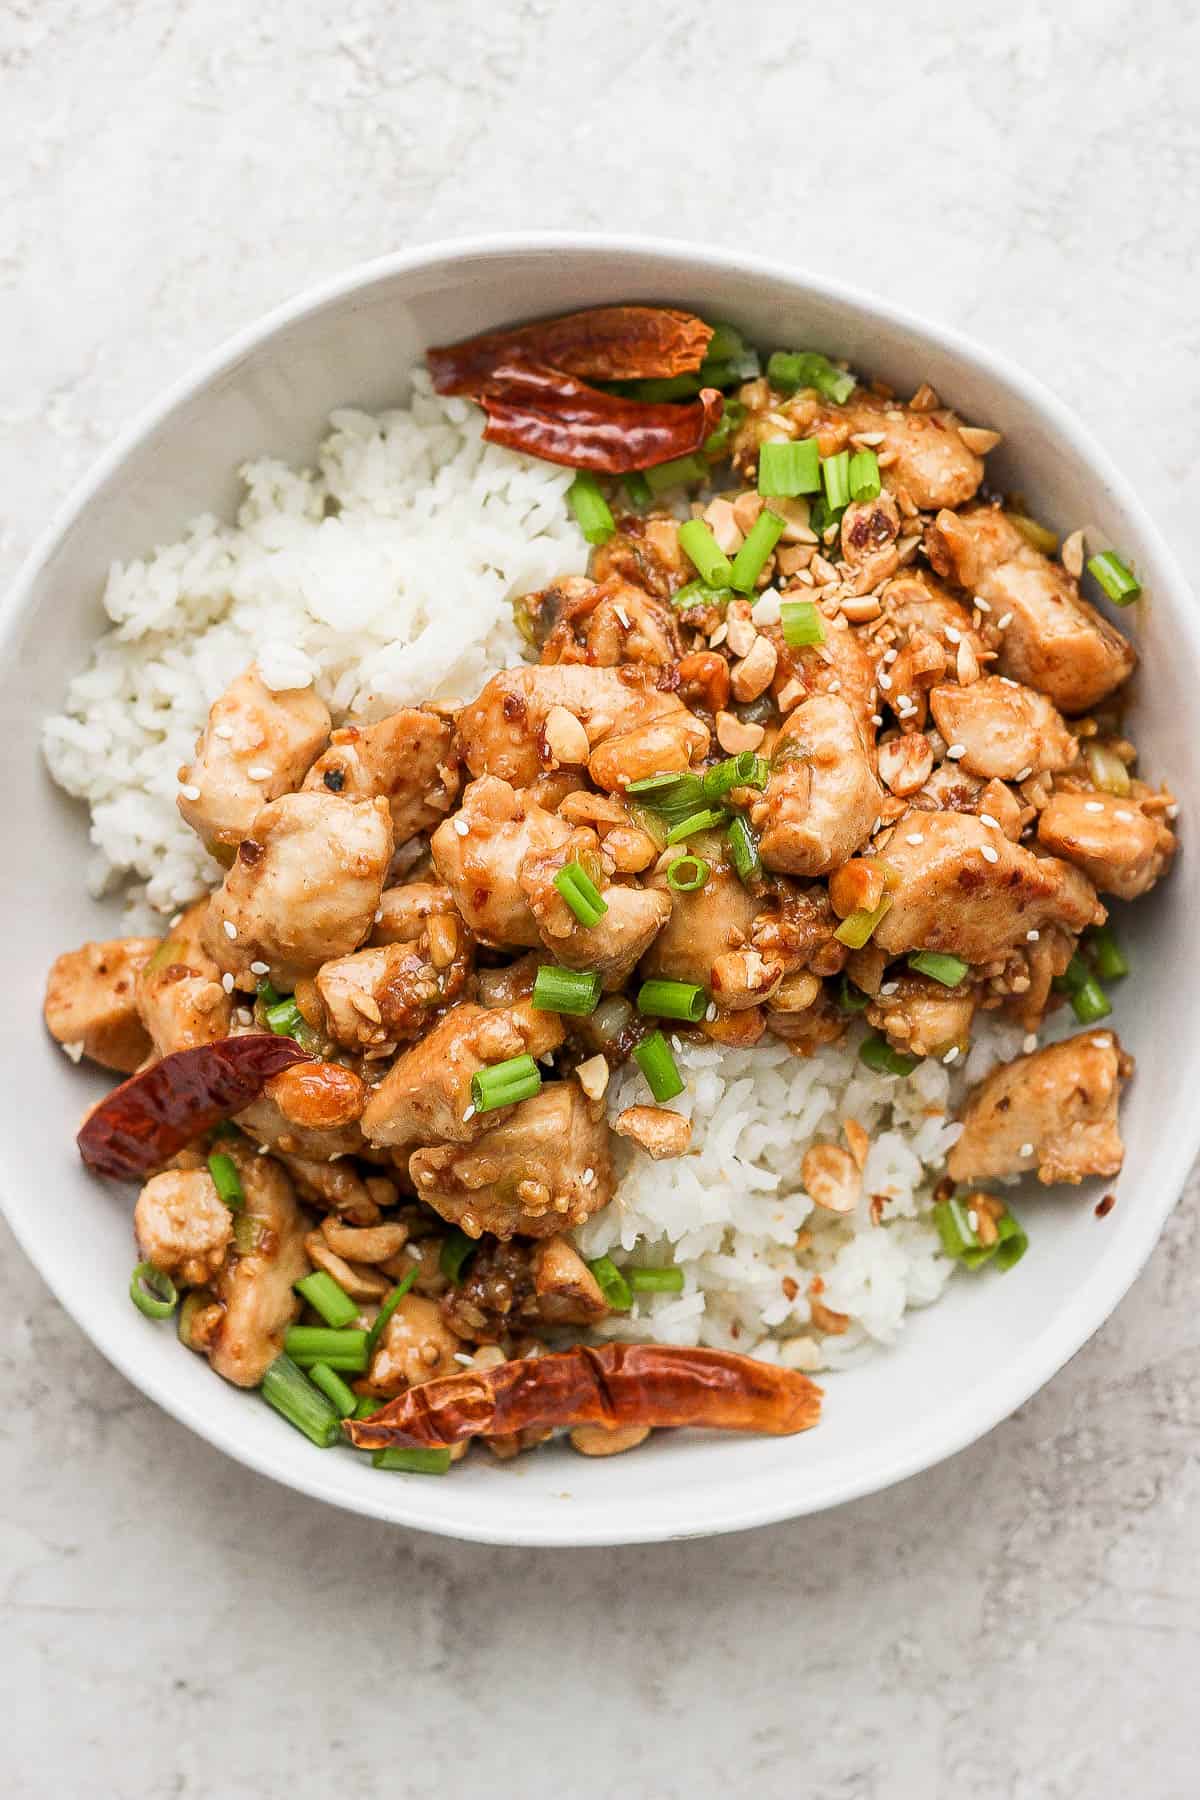 Kung pao chicken in a bowl.